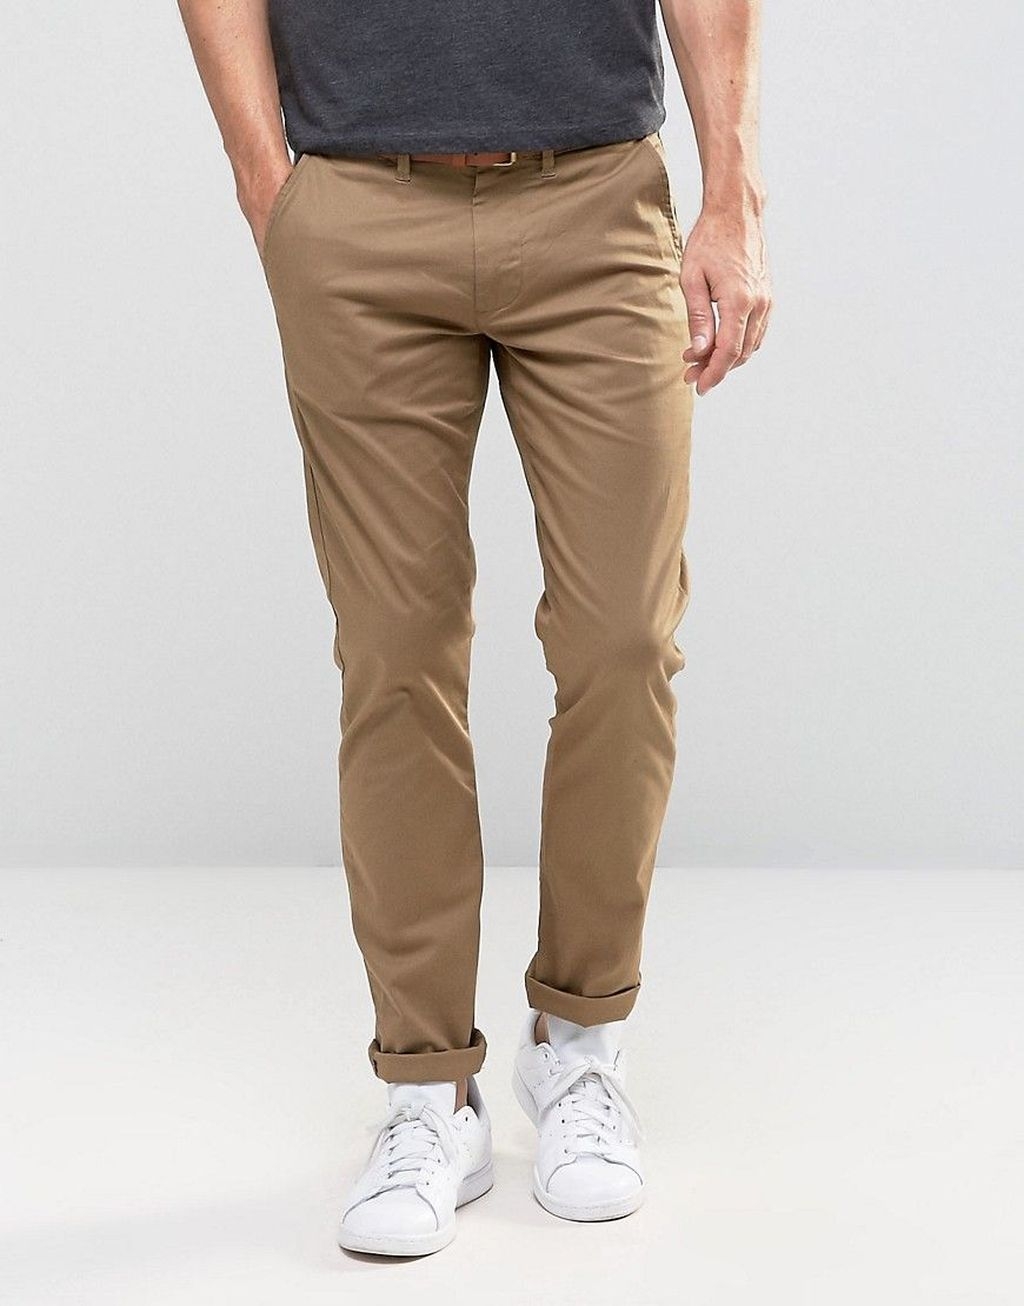 41 Outstanding Mens Chinos Outfit Ideas For Casual Style